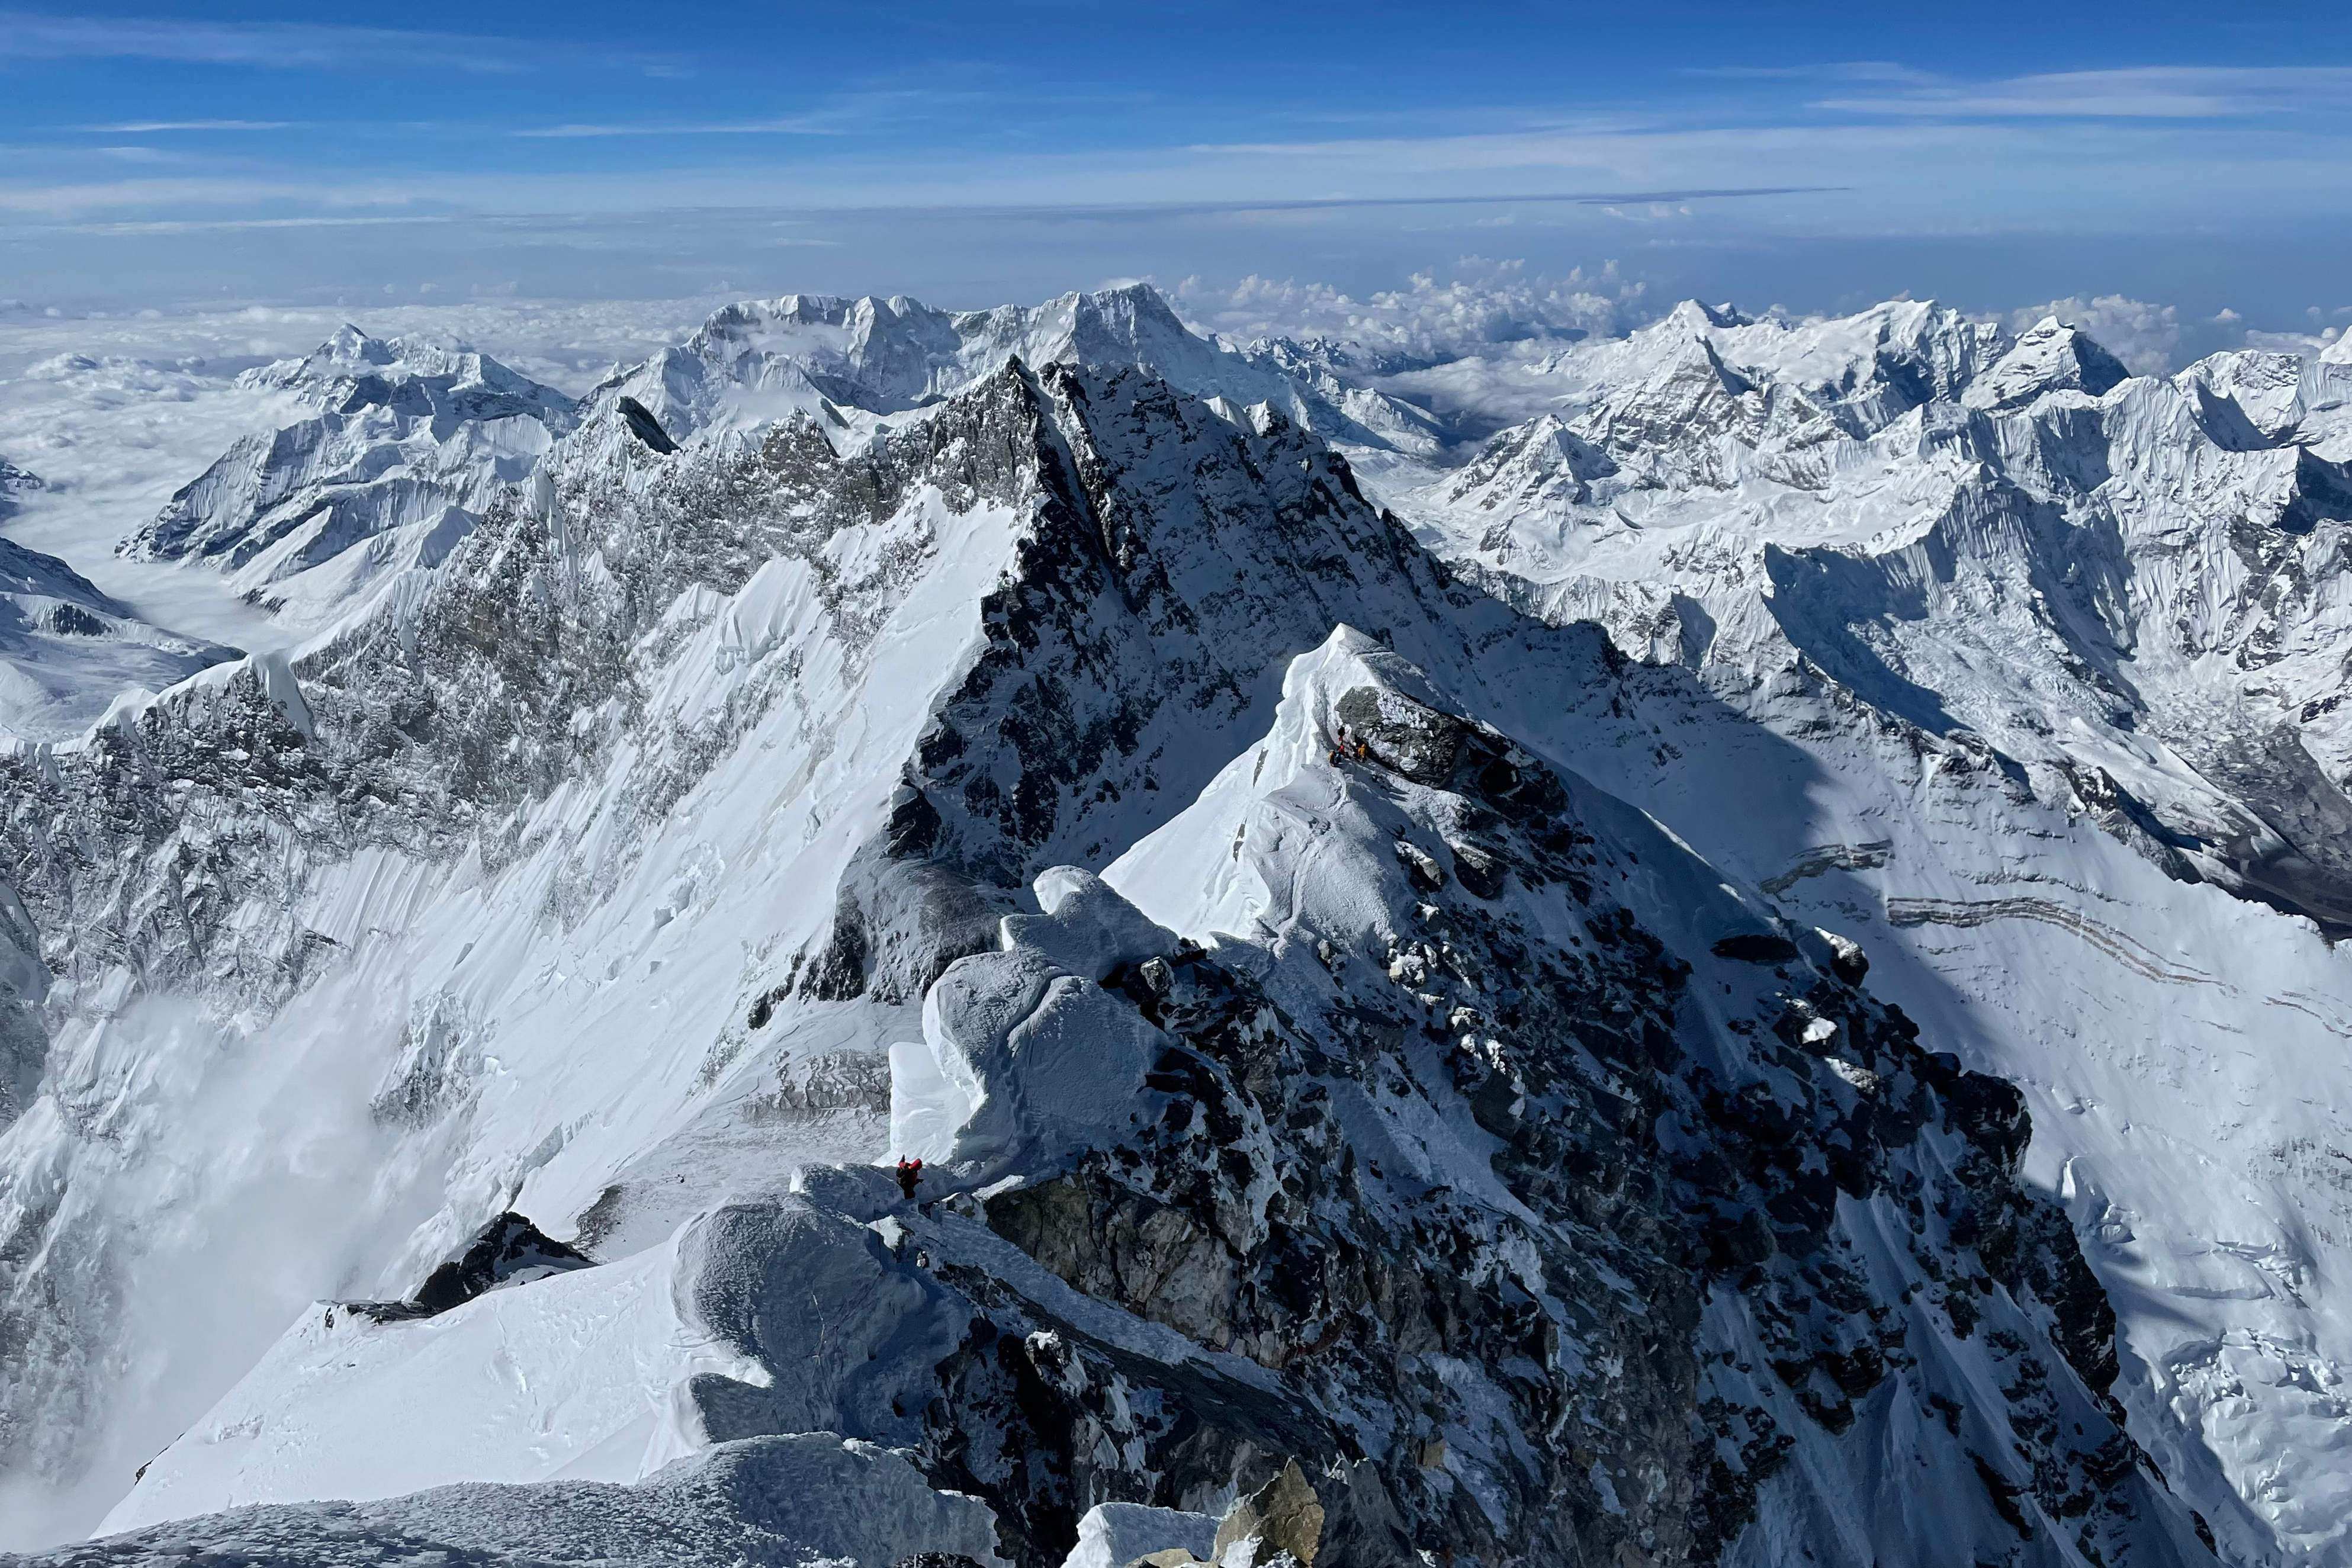 Eight climbers, including a Chinese and Indian national, have died on Mount Everest during the current season which started in March. Photo: AFP